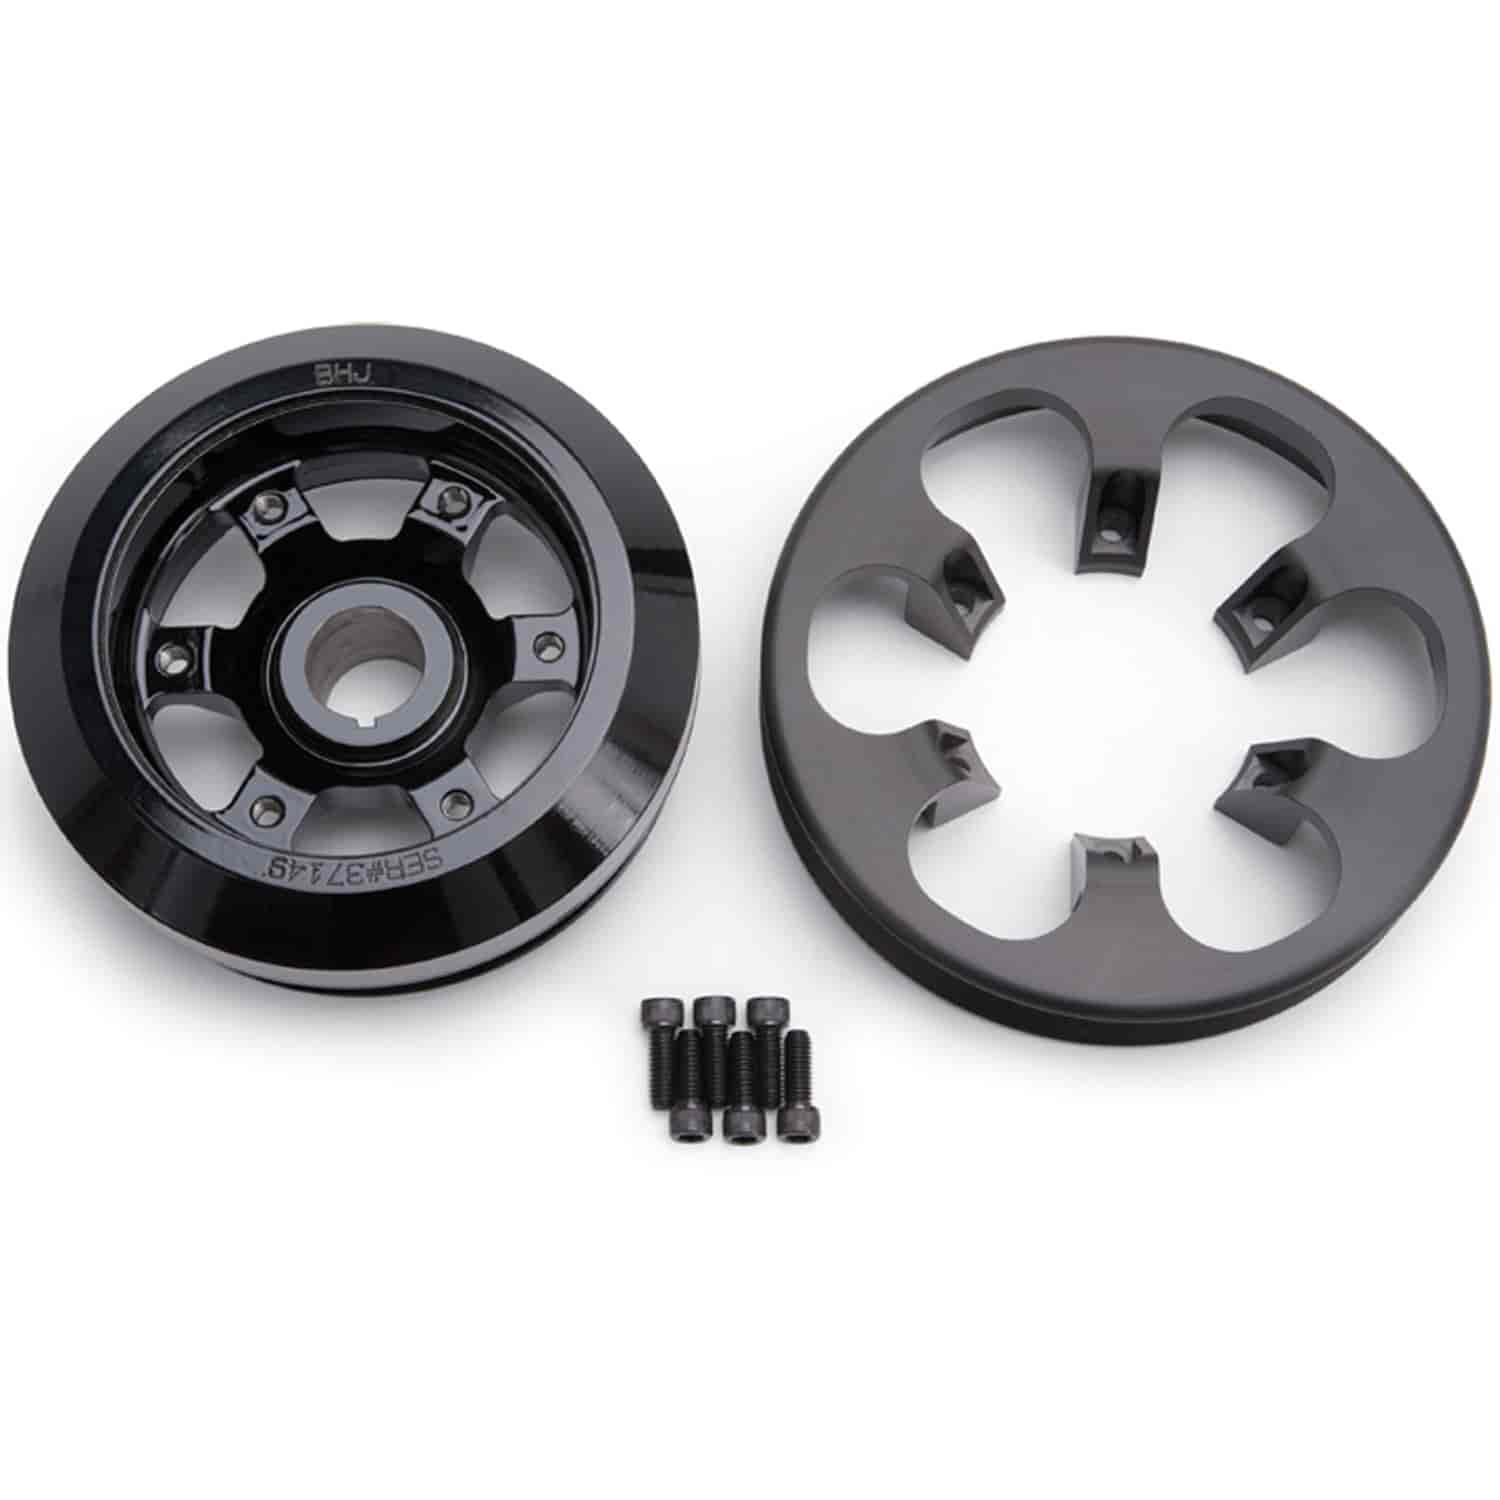 E-Force Overdrive Harmonic Damper/Pulley for Ford 5.0L Coyote